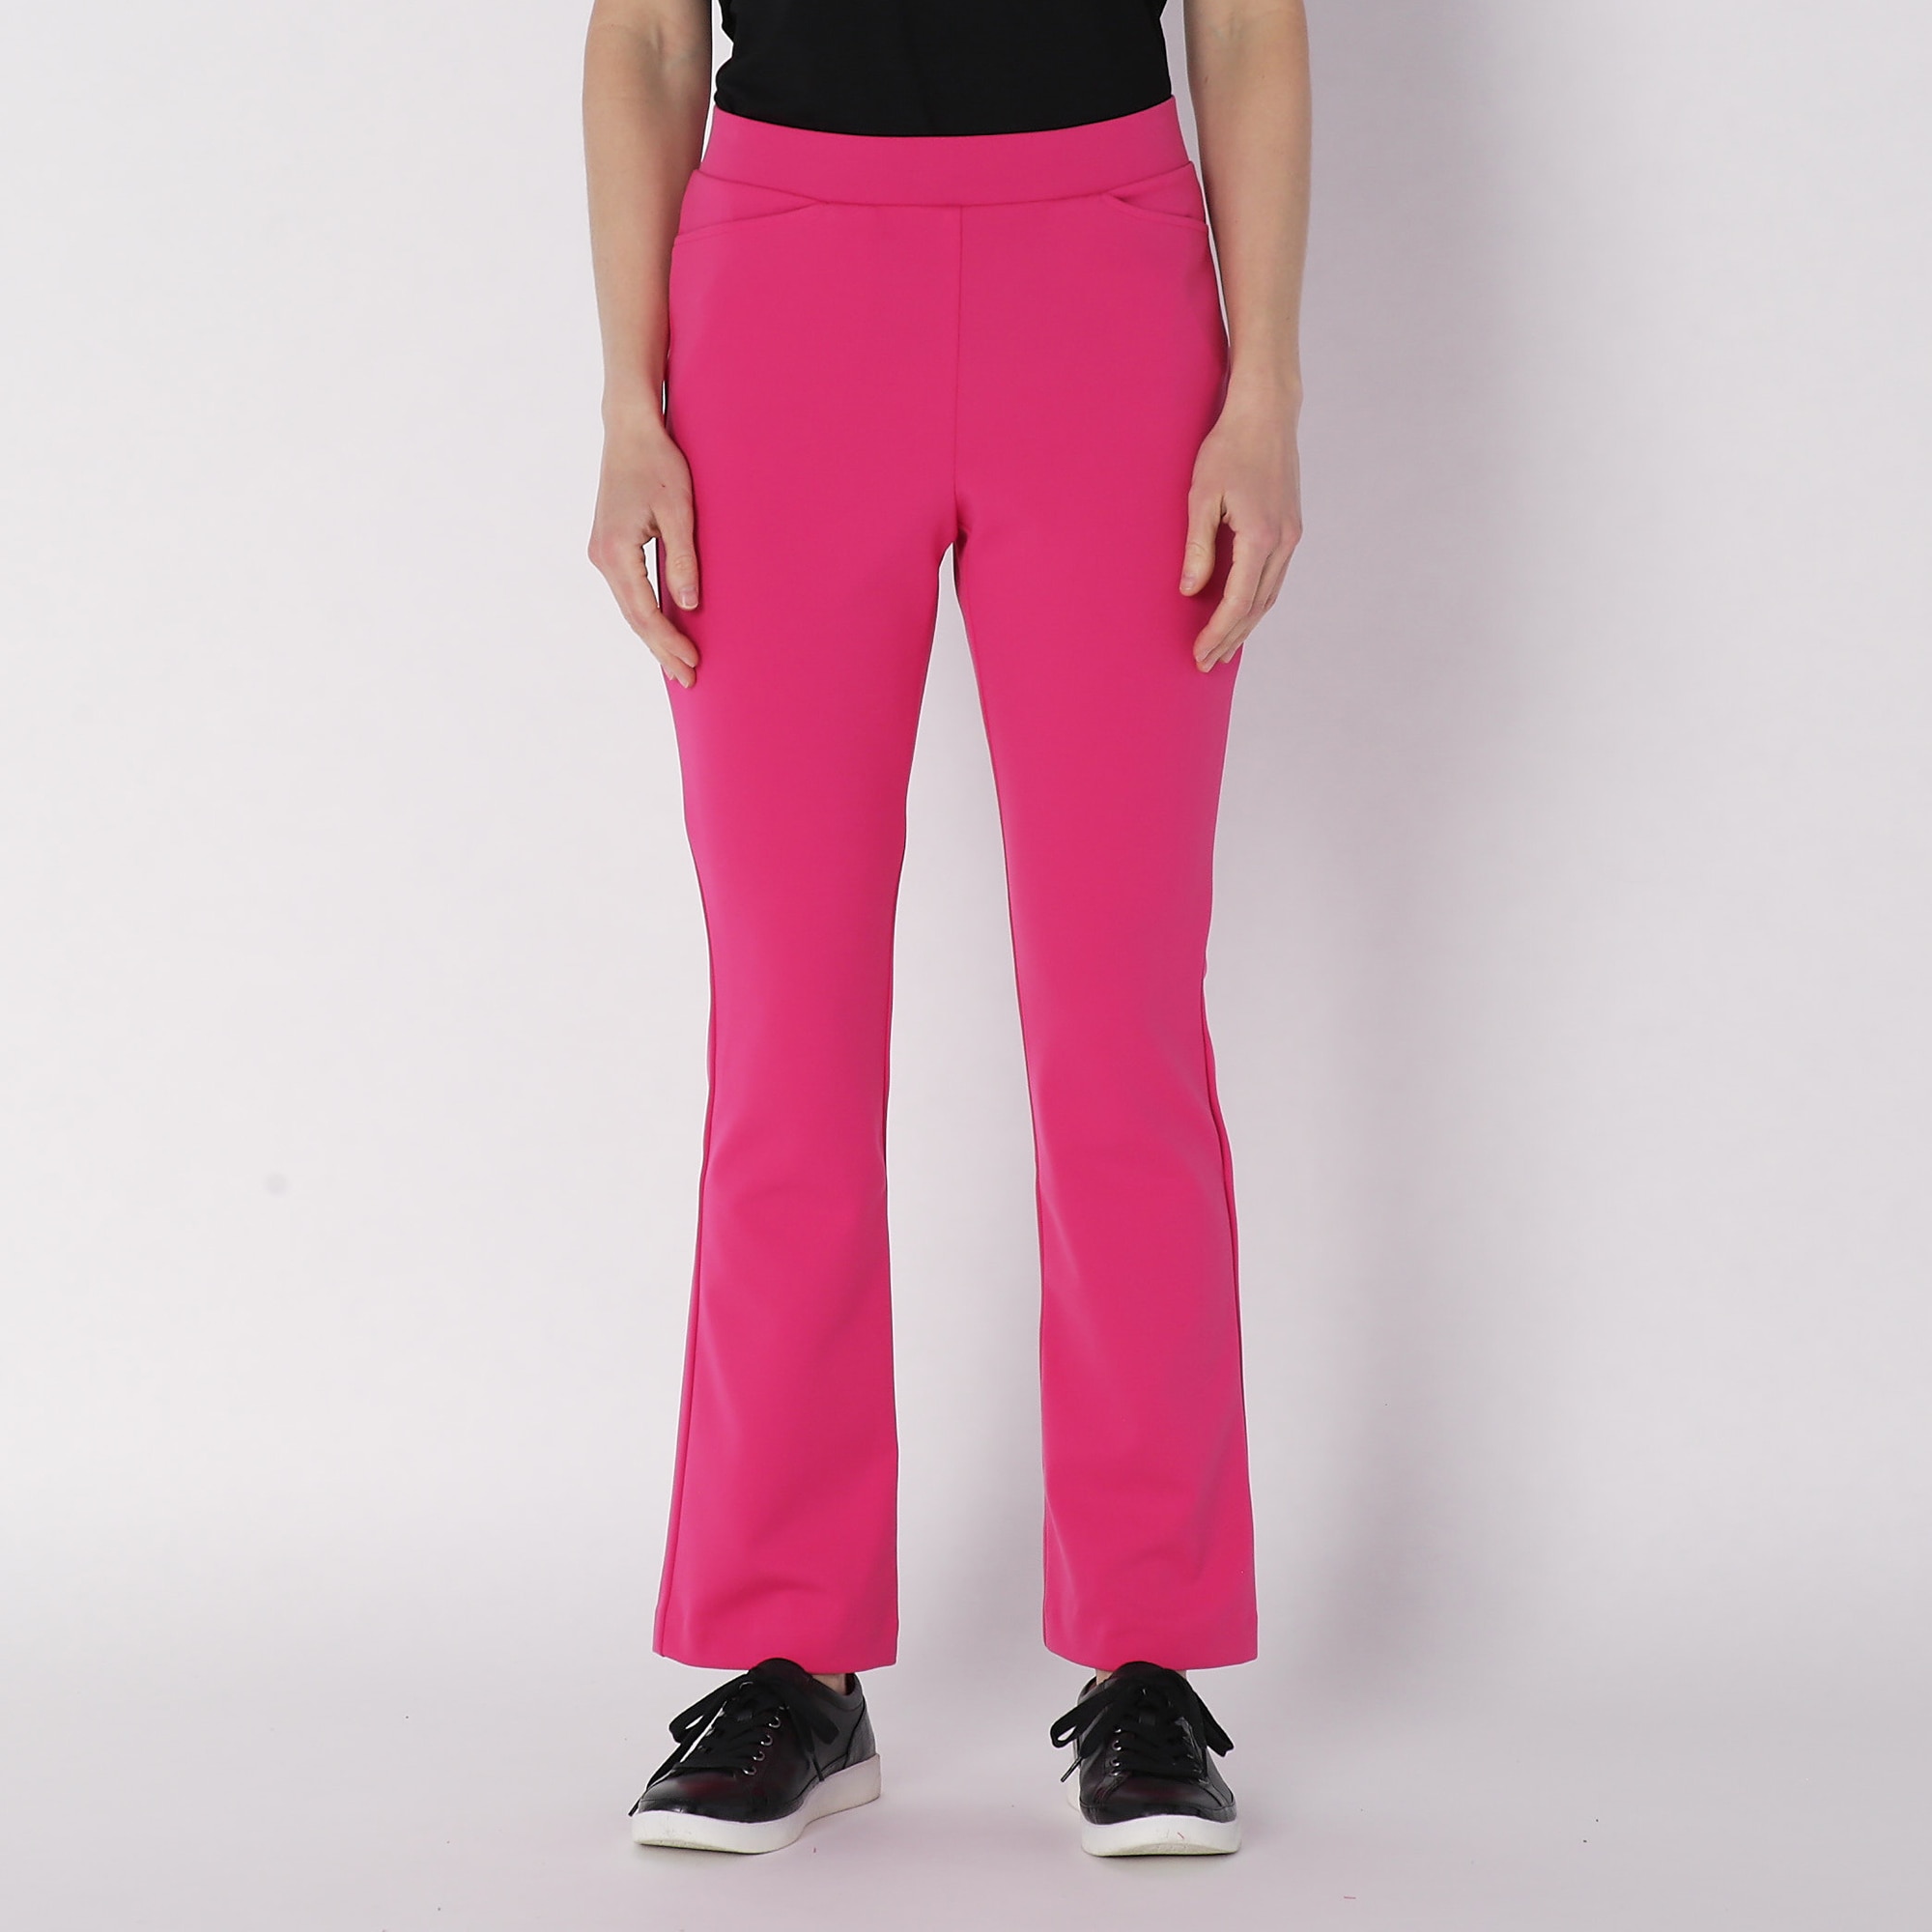 Clothing & Shoes - Bottoms - Pants - Mr. Max Stretch Ankle Pant